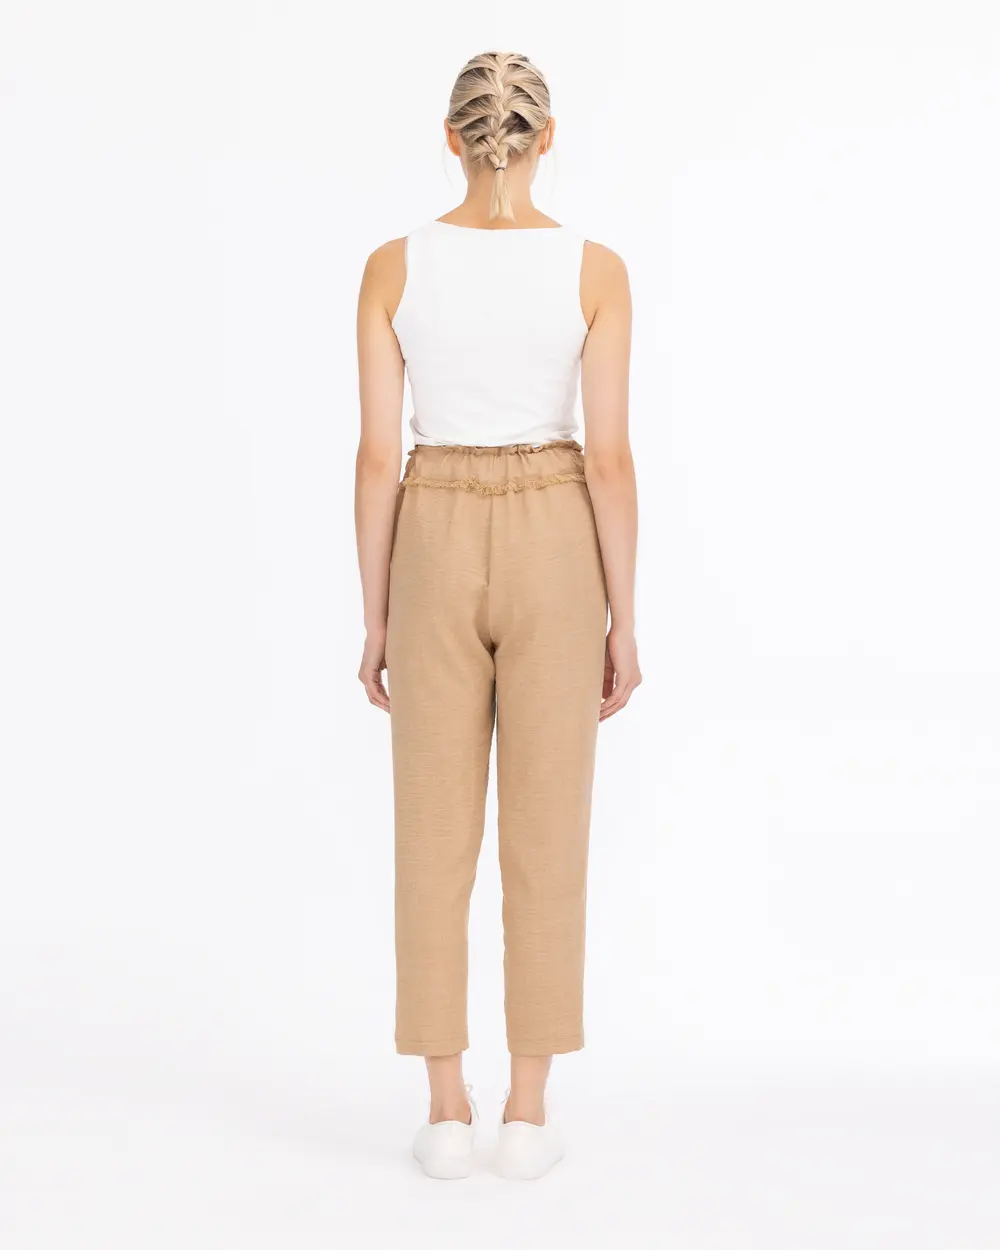 Elastic Waist Lace Detail Ankle Length Trousers